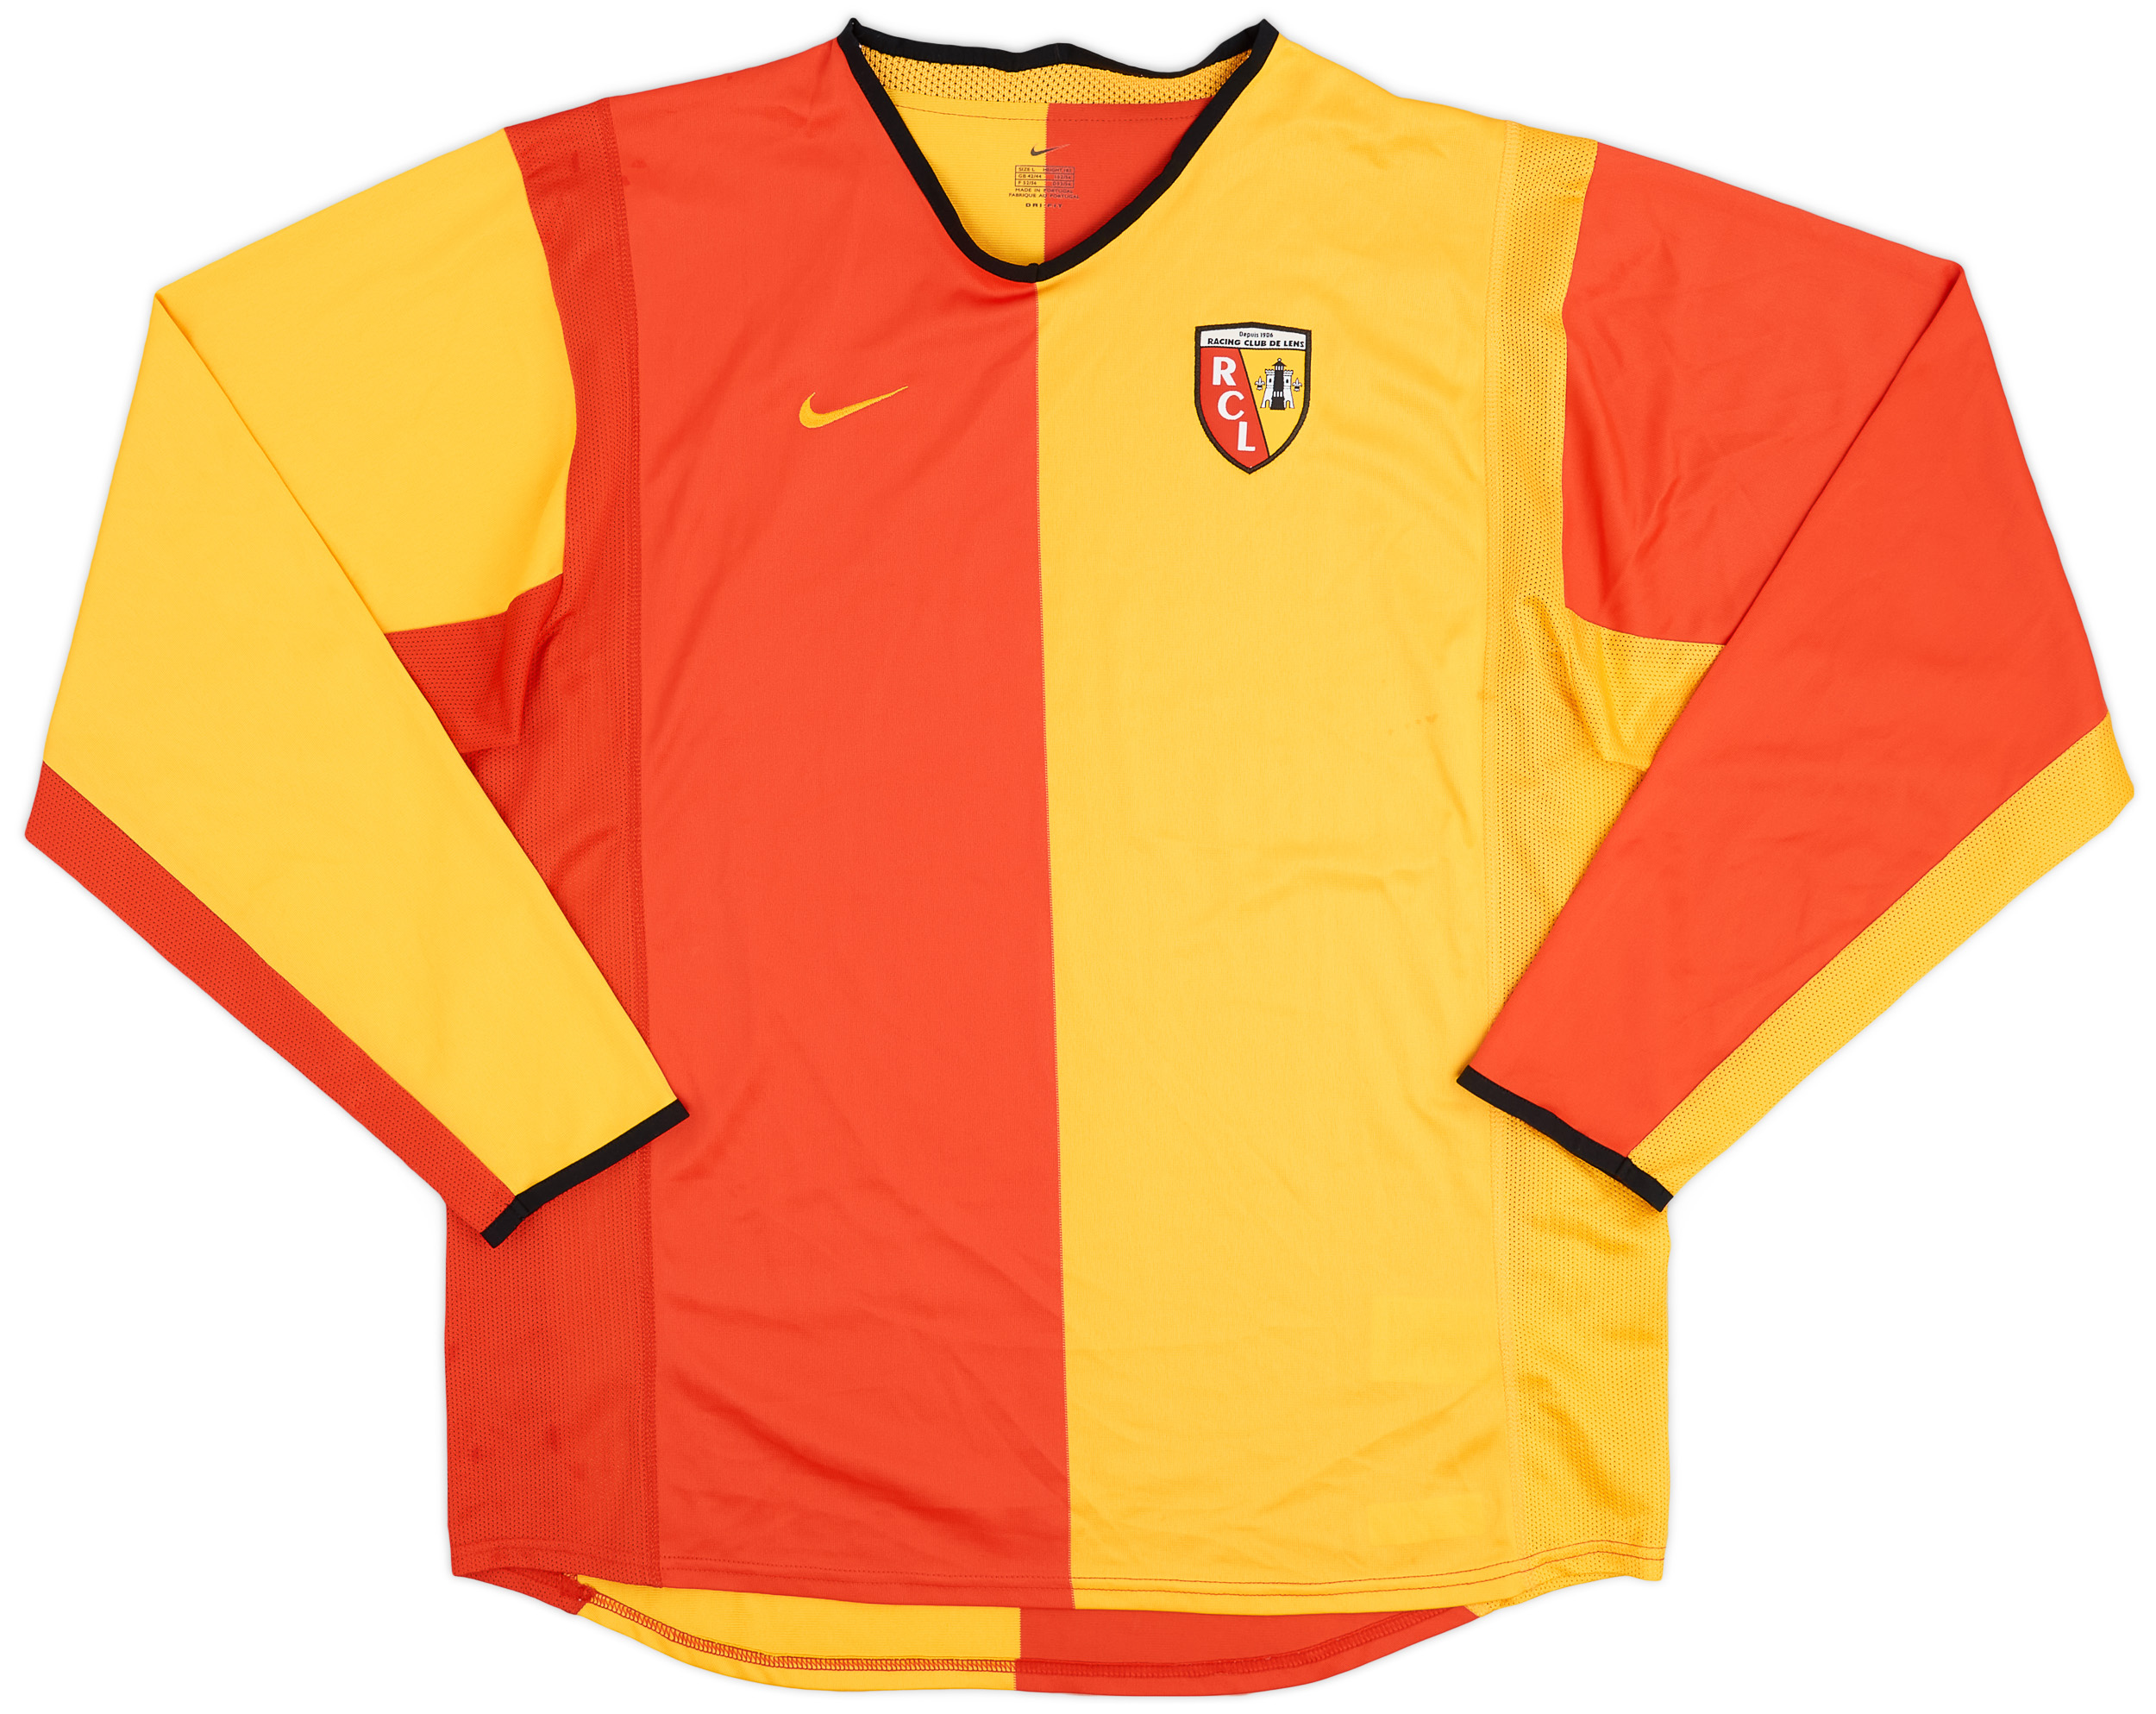 2001-02 RC Lens Player Issue Home Shirt - 9/10 - ()